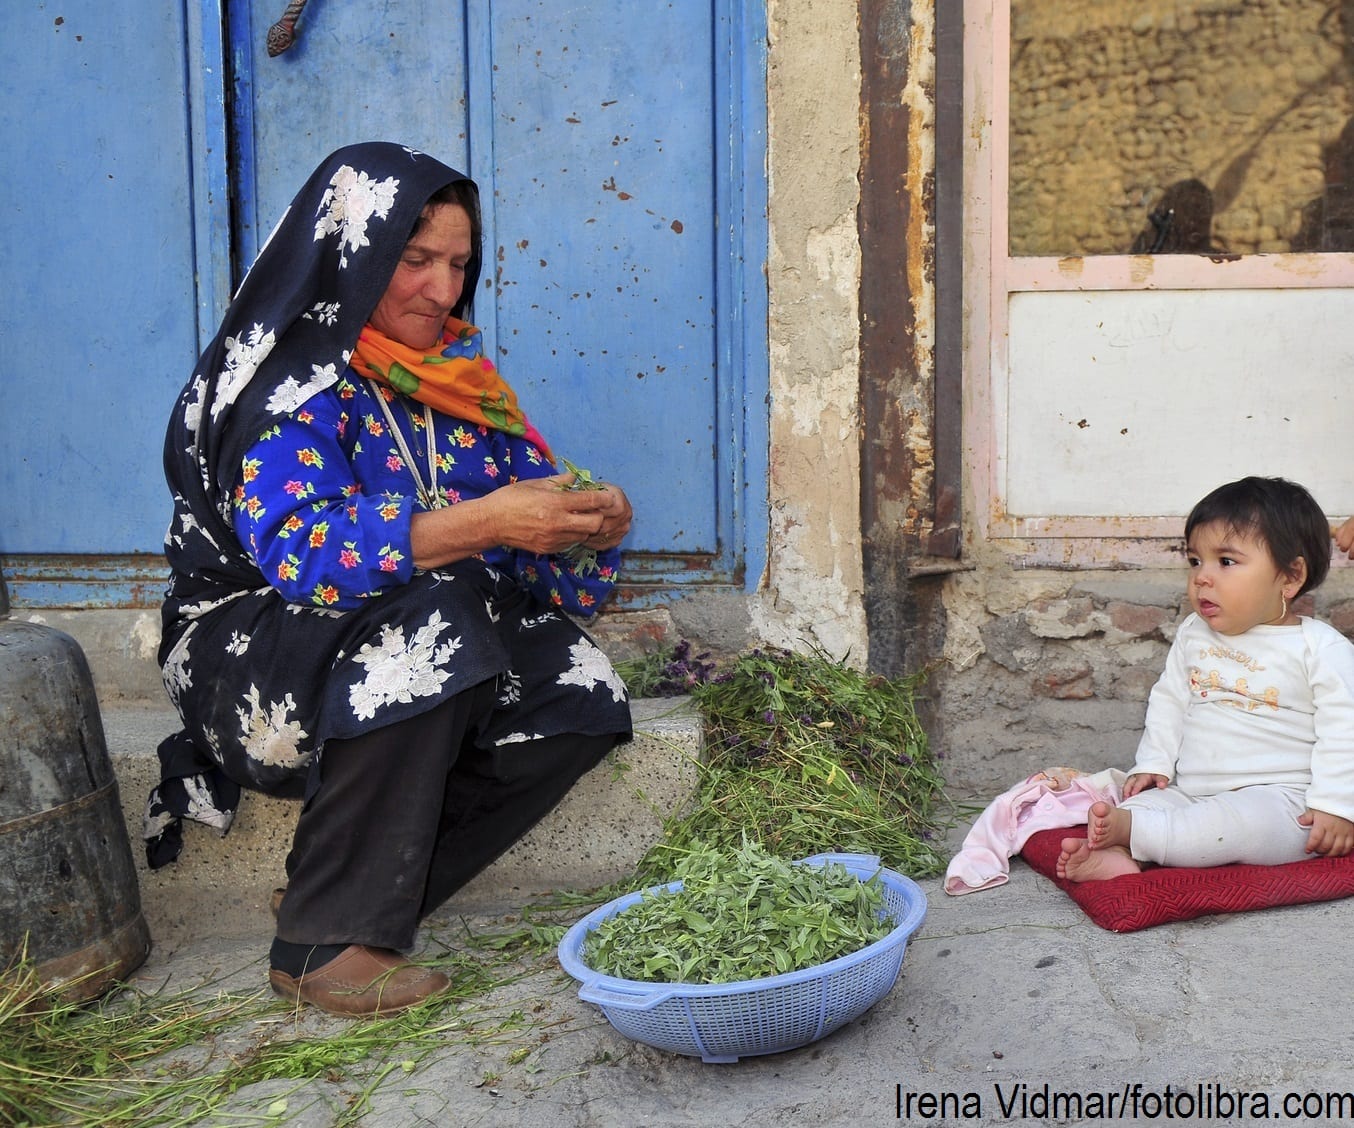 A woman with her grandchildren in Iran.